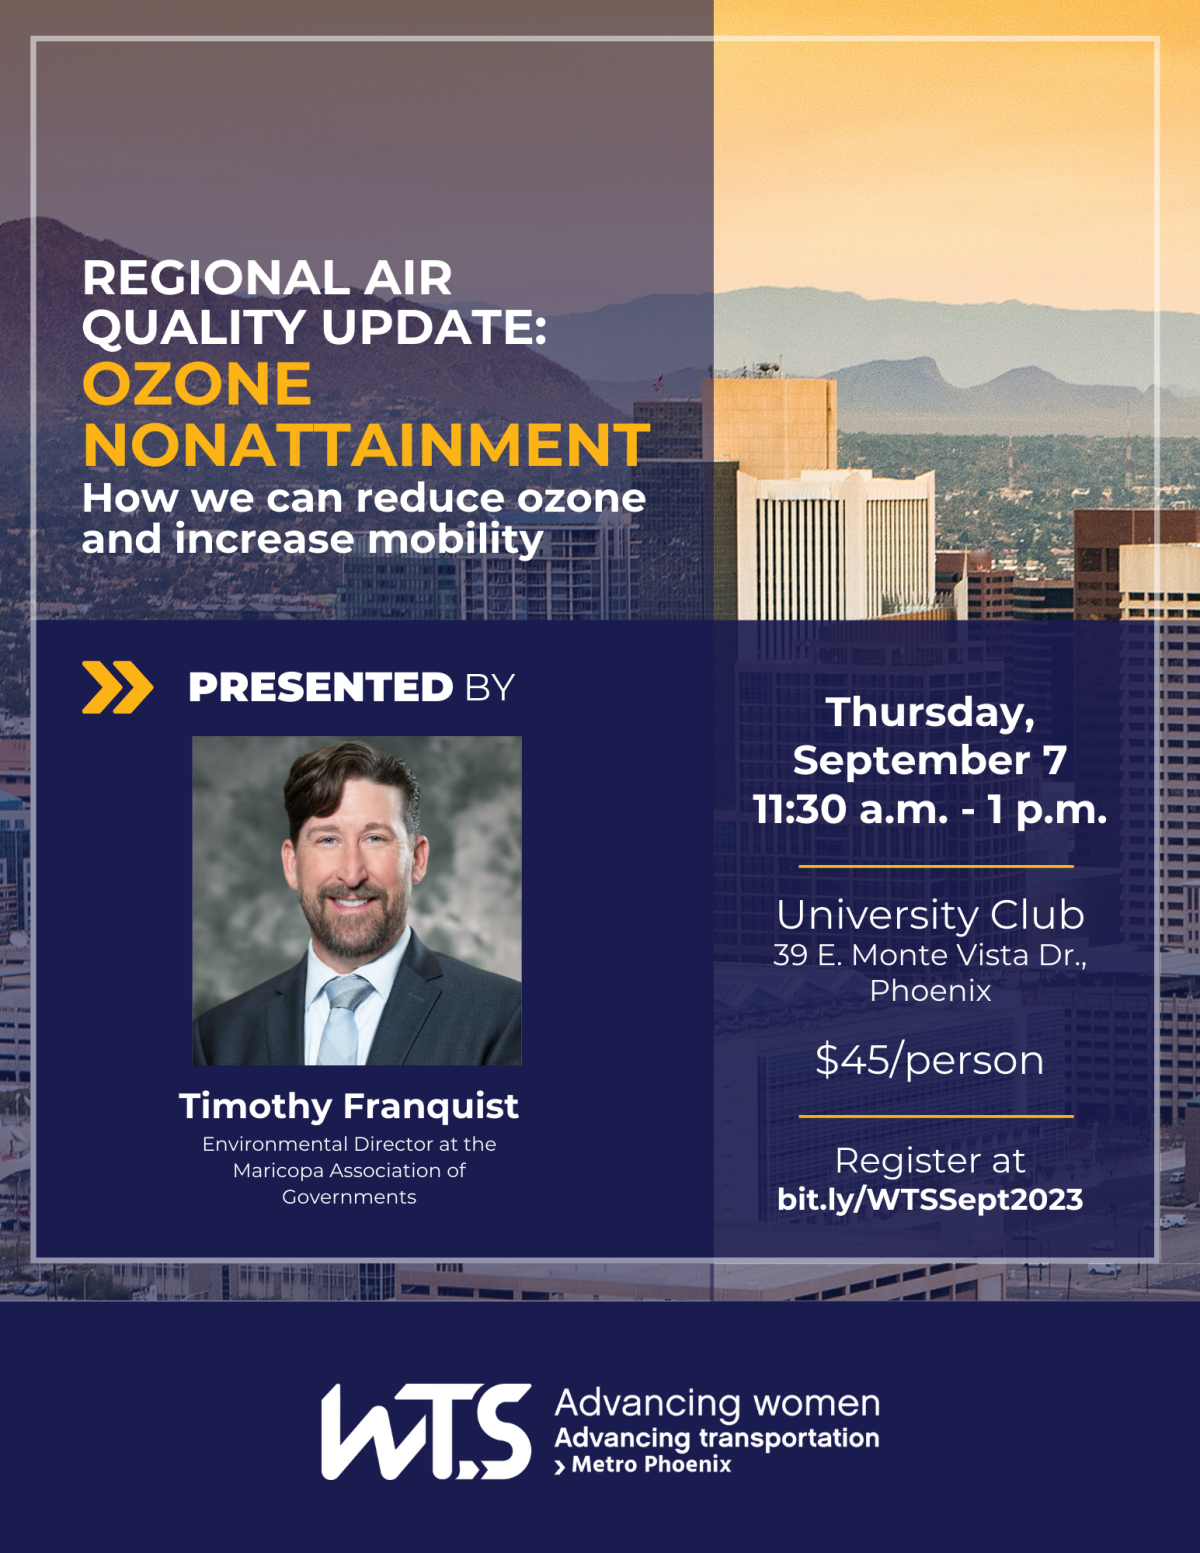 Join WTS Metro Phoenix on Sept 7 to hear from MAG's Tim Franquist about Air Quality in the Region at University Club in Phoenix starting at 1130